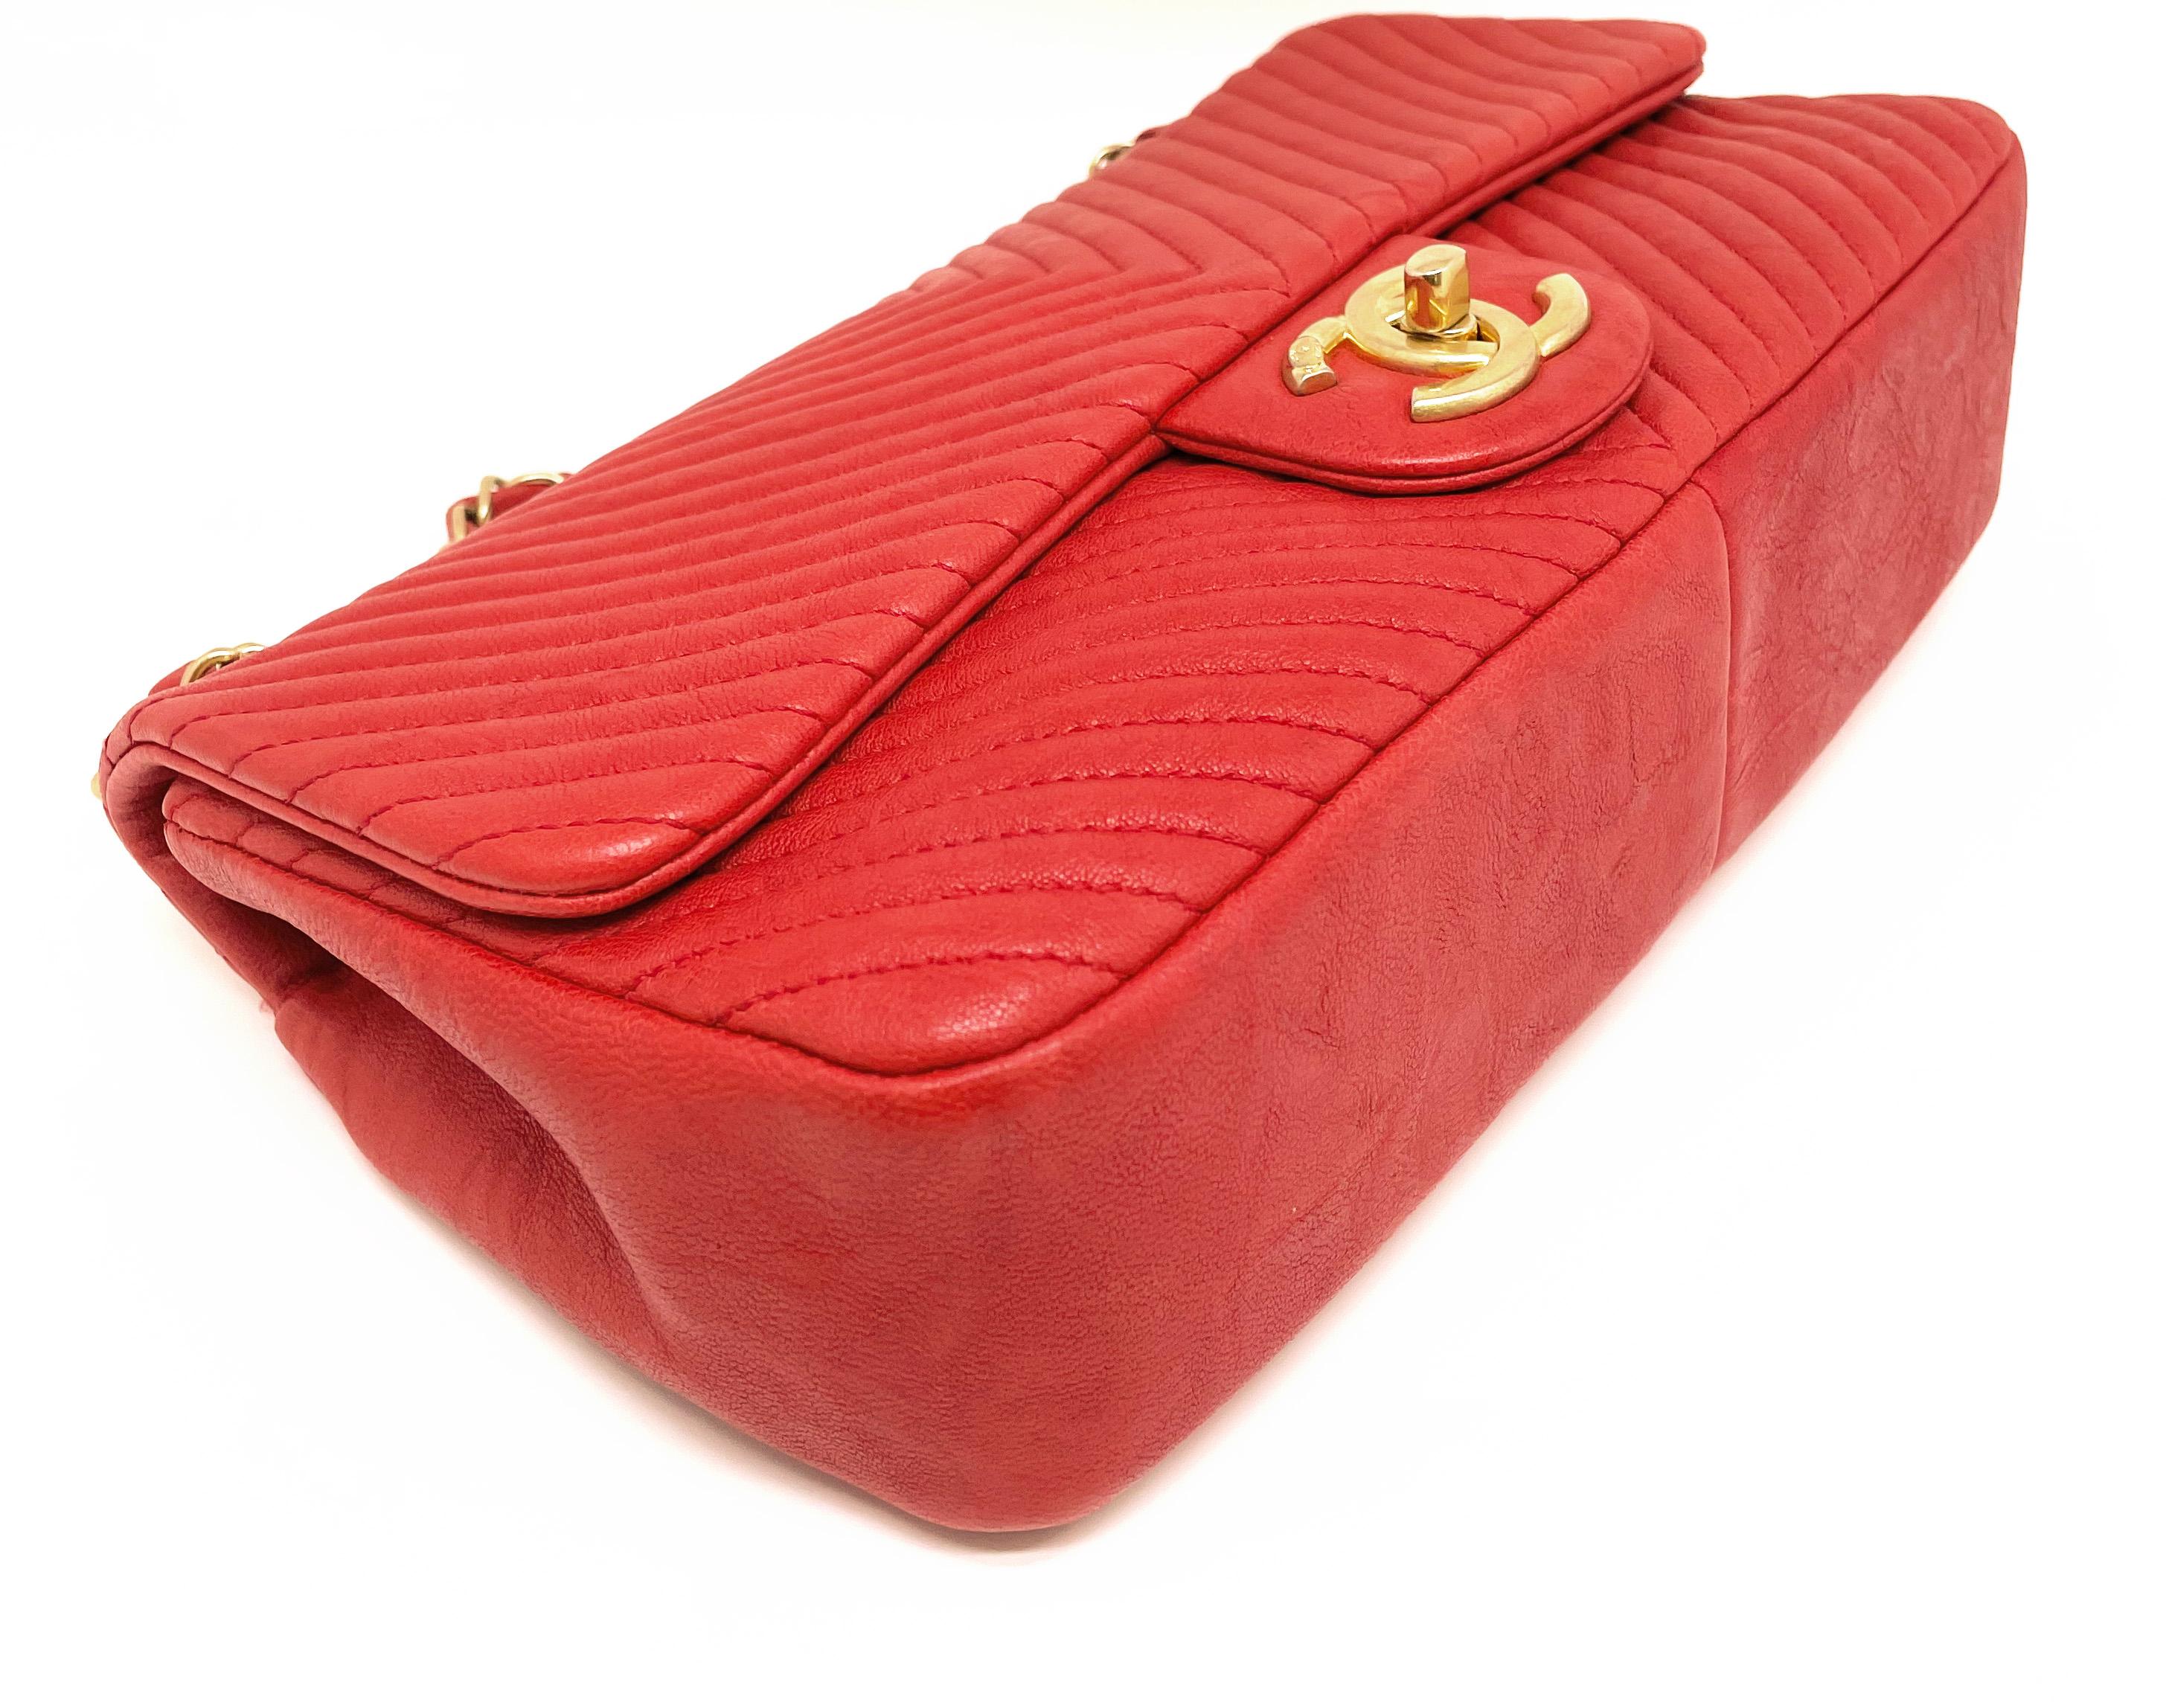 Superb Chanel 27 cm bag in leather and Valentine Red Chevron pattern For Sale 4